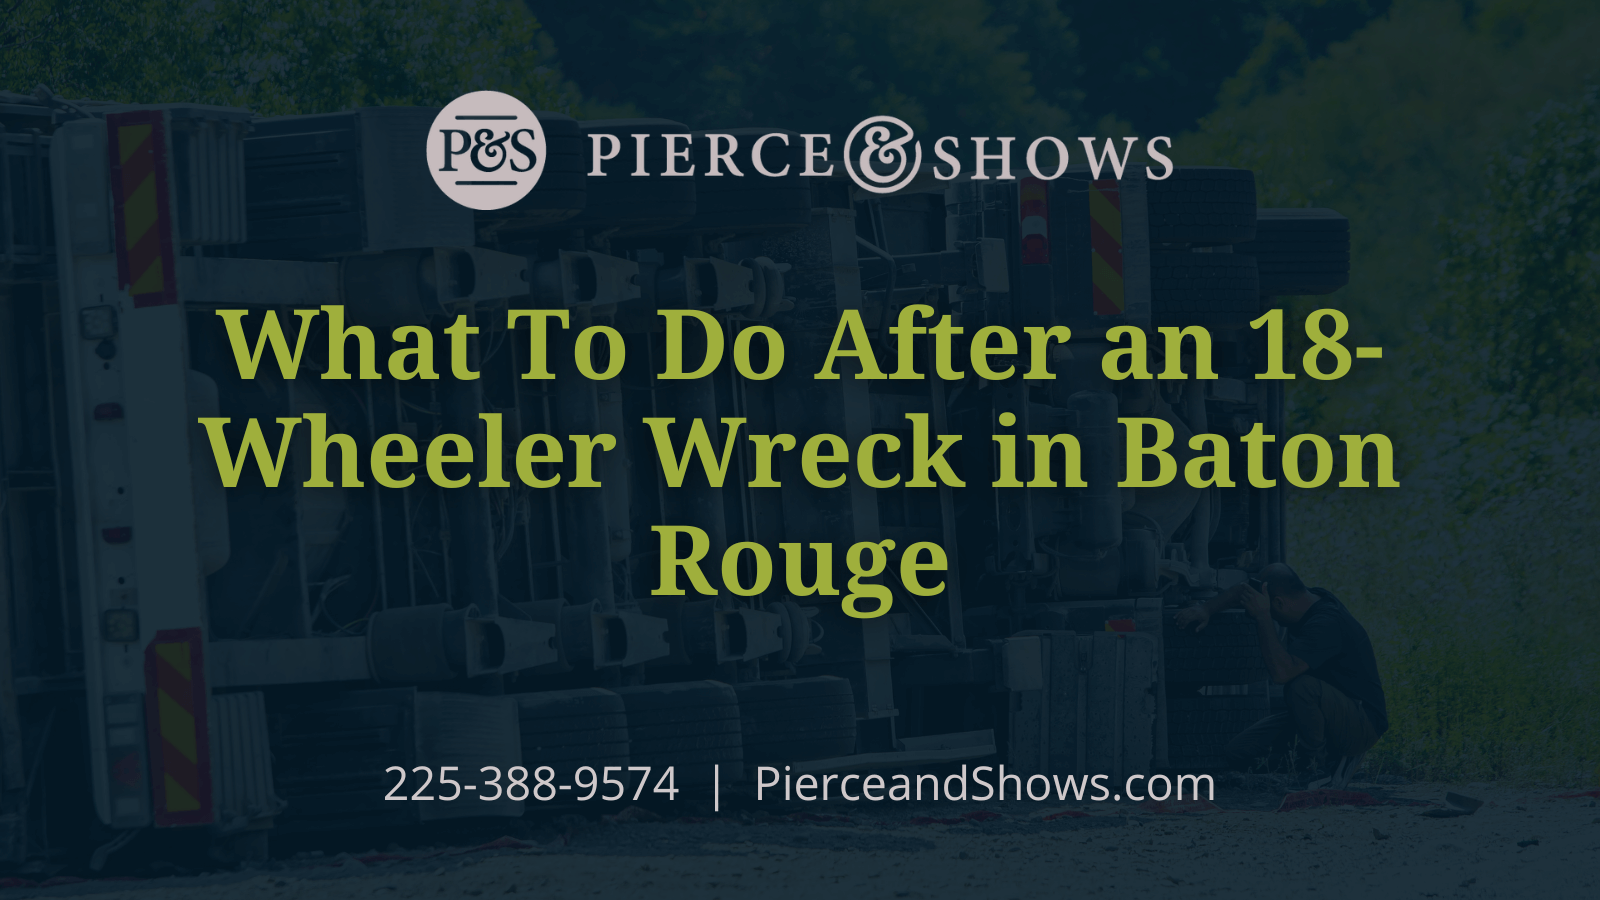 What To Do After an 18-Wheeler Wreck in Baton Rouge - Baton Rouge Louisiana injury attorney Pierce & Shows